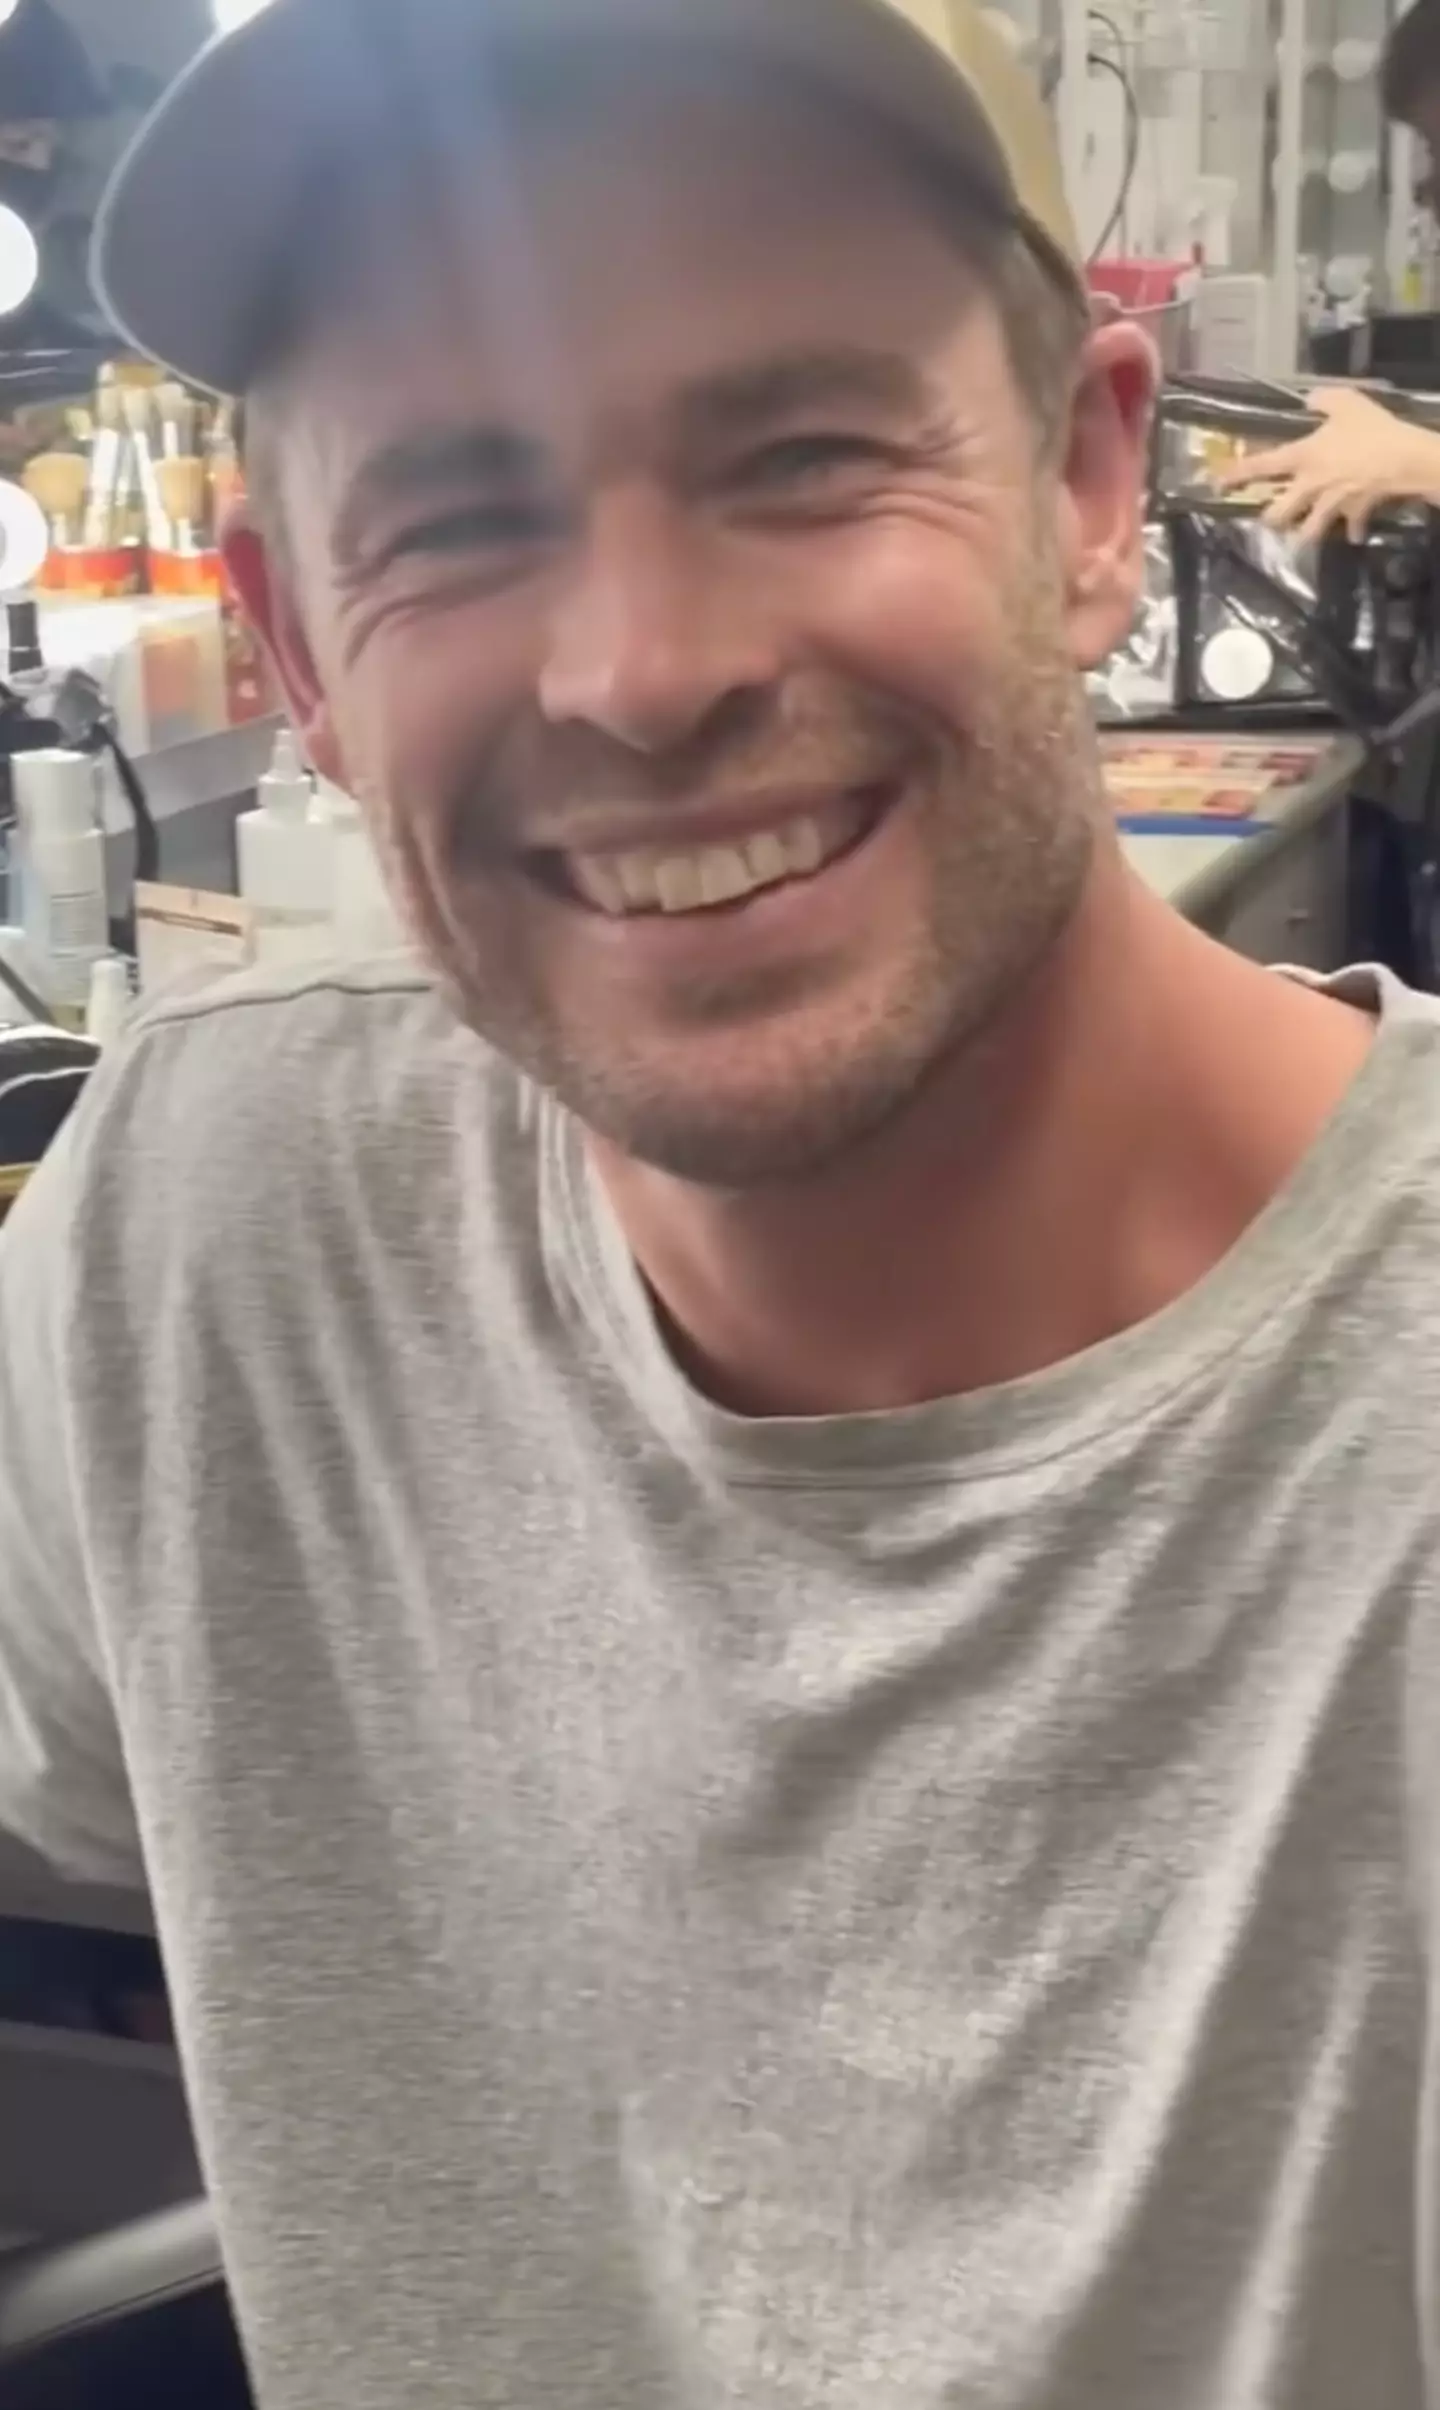 Chris Hemsworth looked very different with prosthetic teeth. (Instagram/@chrishemsworth)